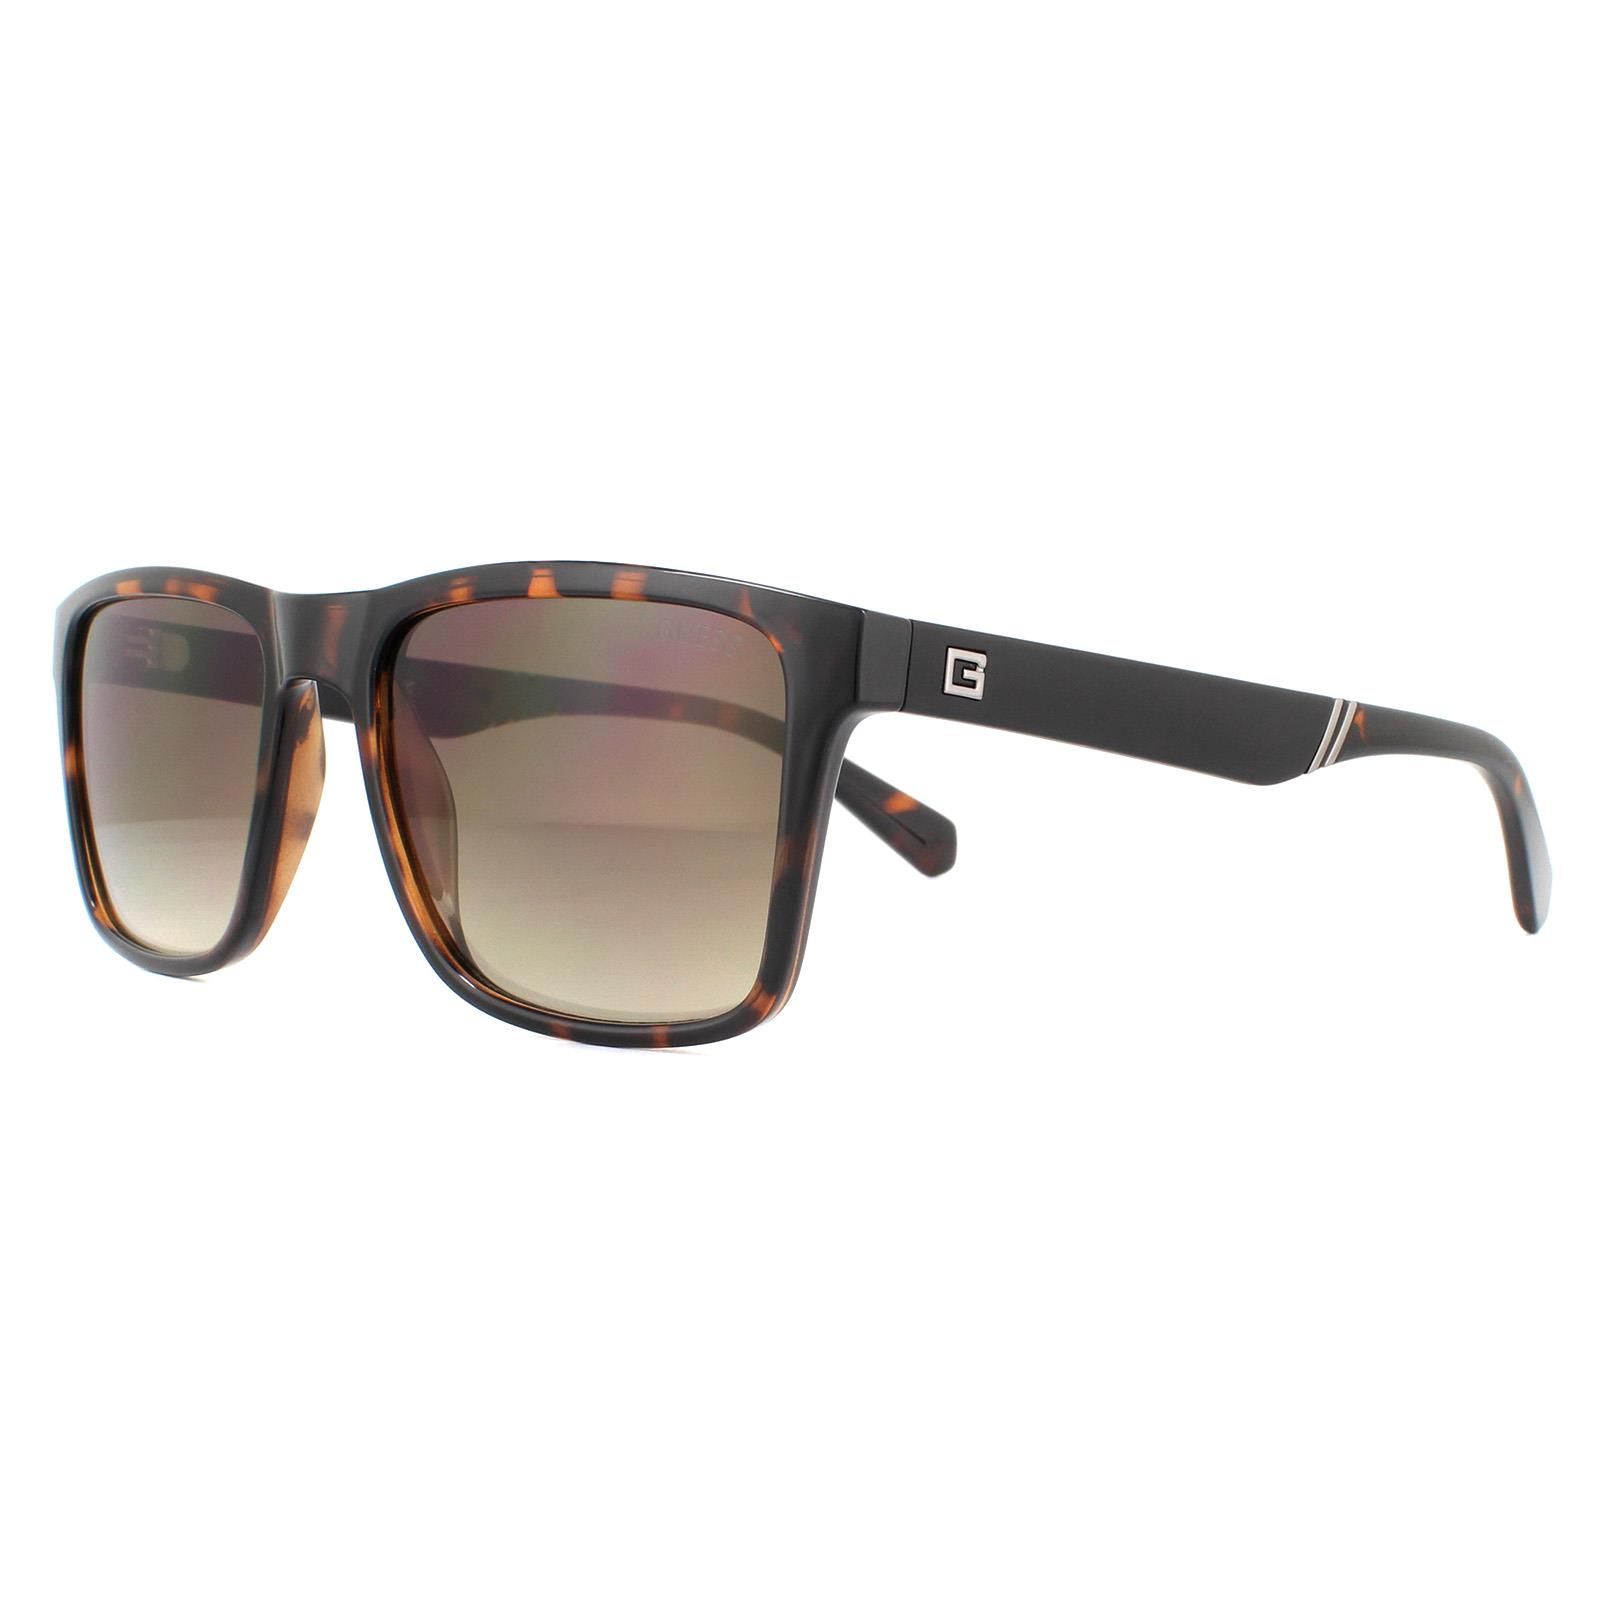 Guess Sunglasses GU6928 52G Dark Havana Black Brown Gradient are a classic rectangular style with the Guess G logo on the temples.